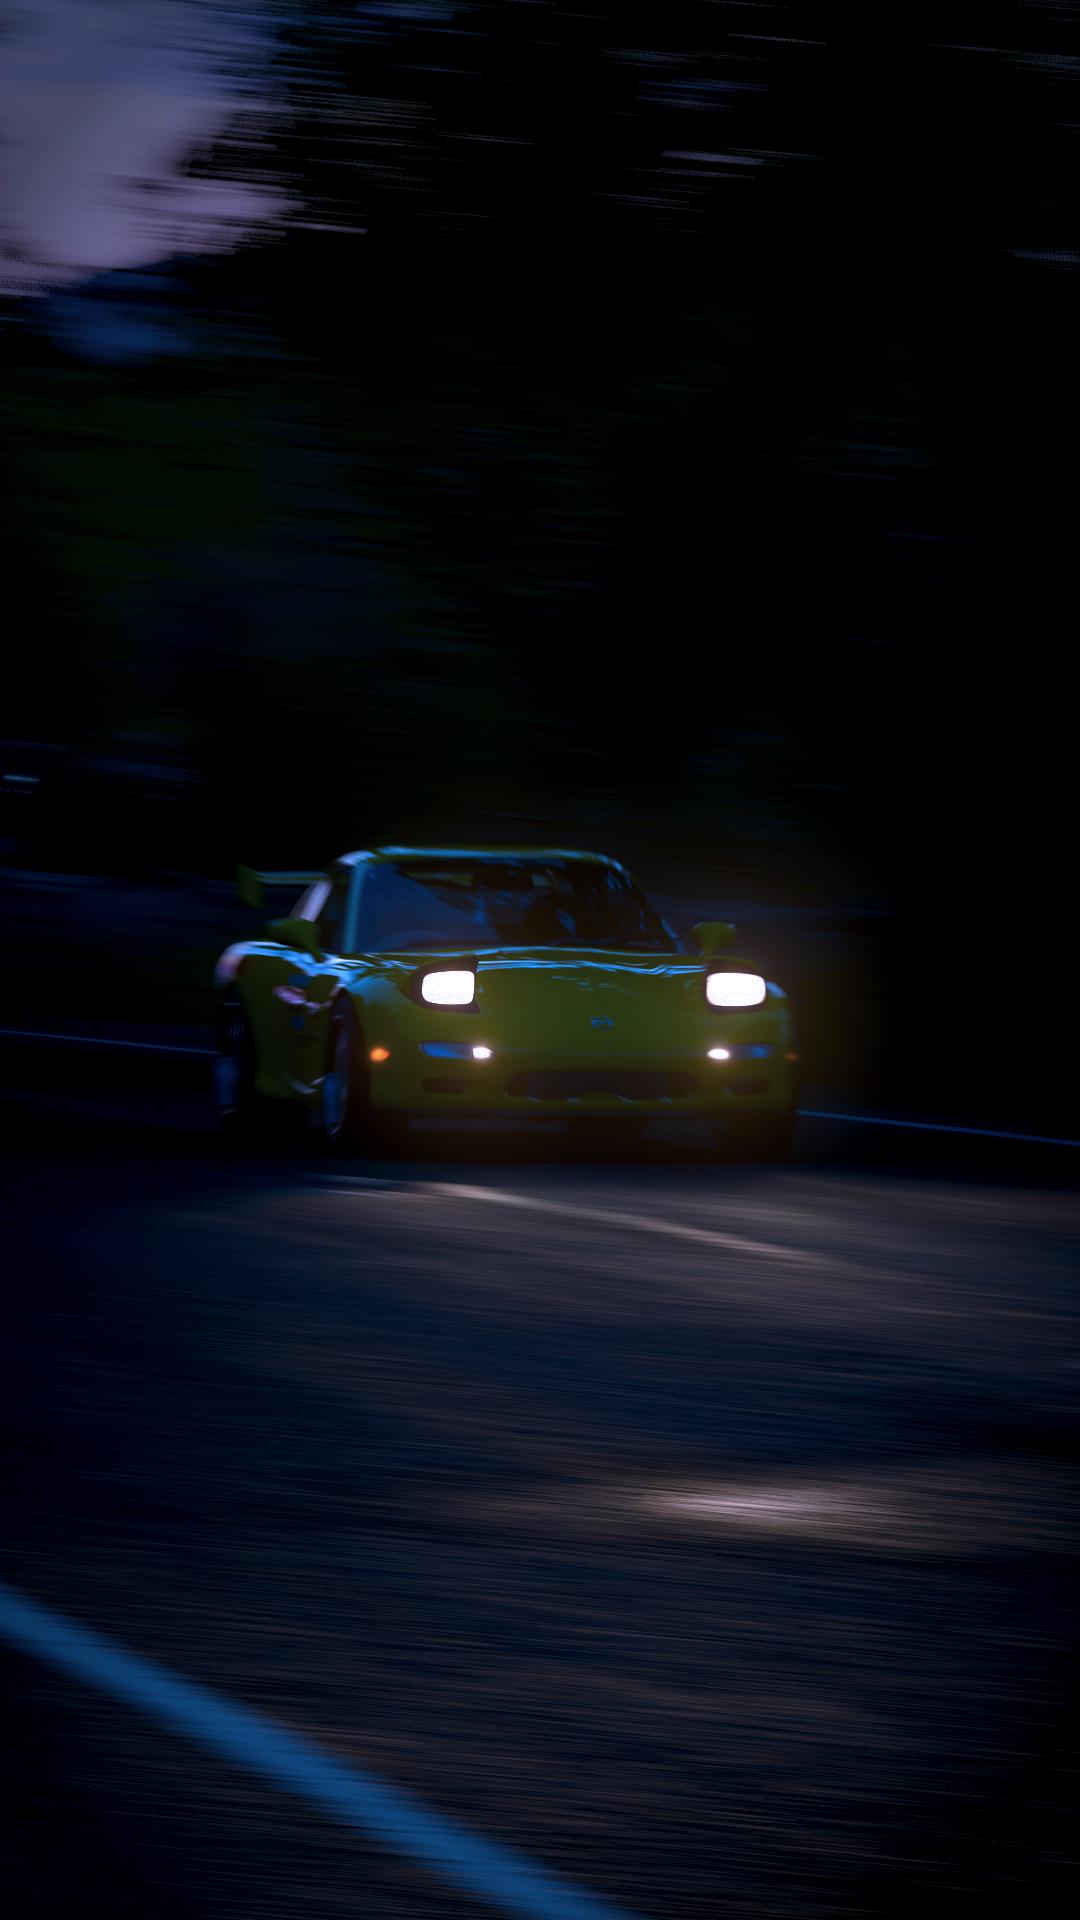 Because you guys seemed to have liked the AE86 wallpaper, i bring you the RX7 now! I hope you guys like it!!